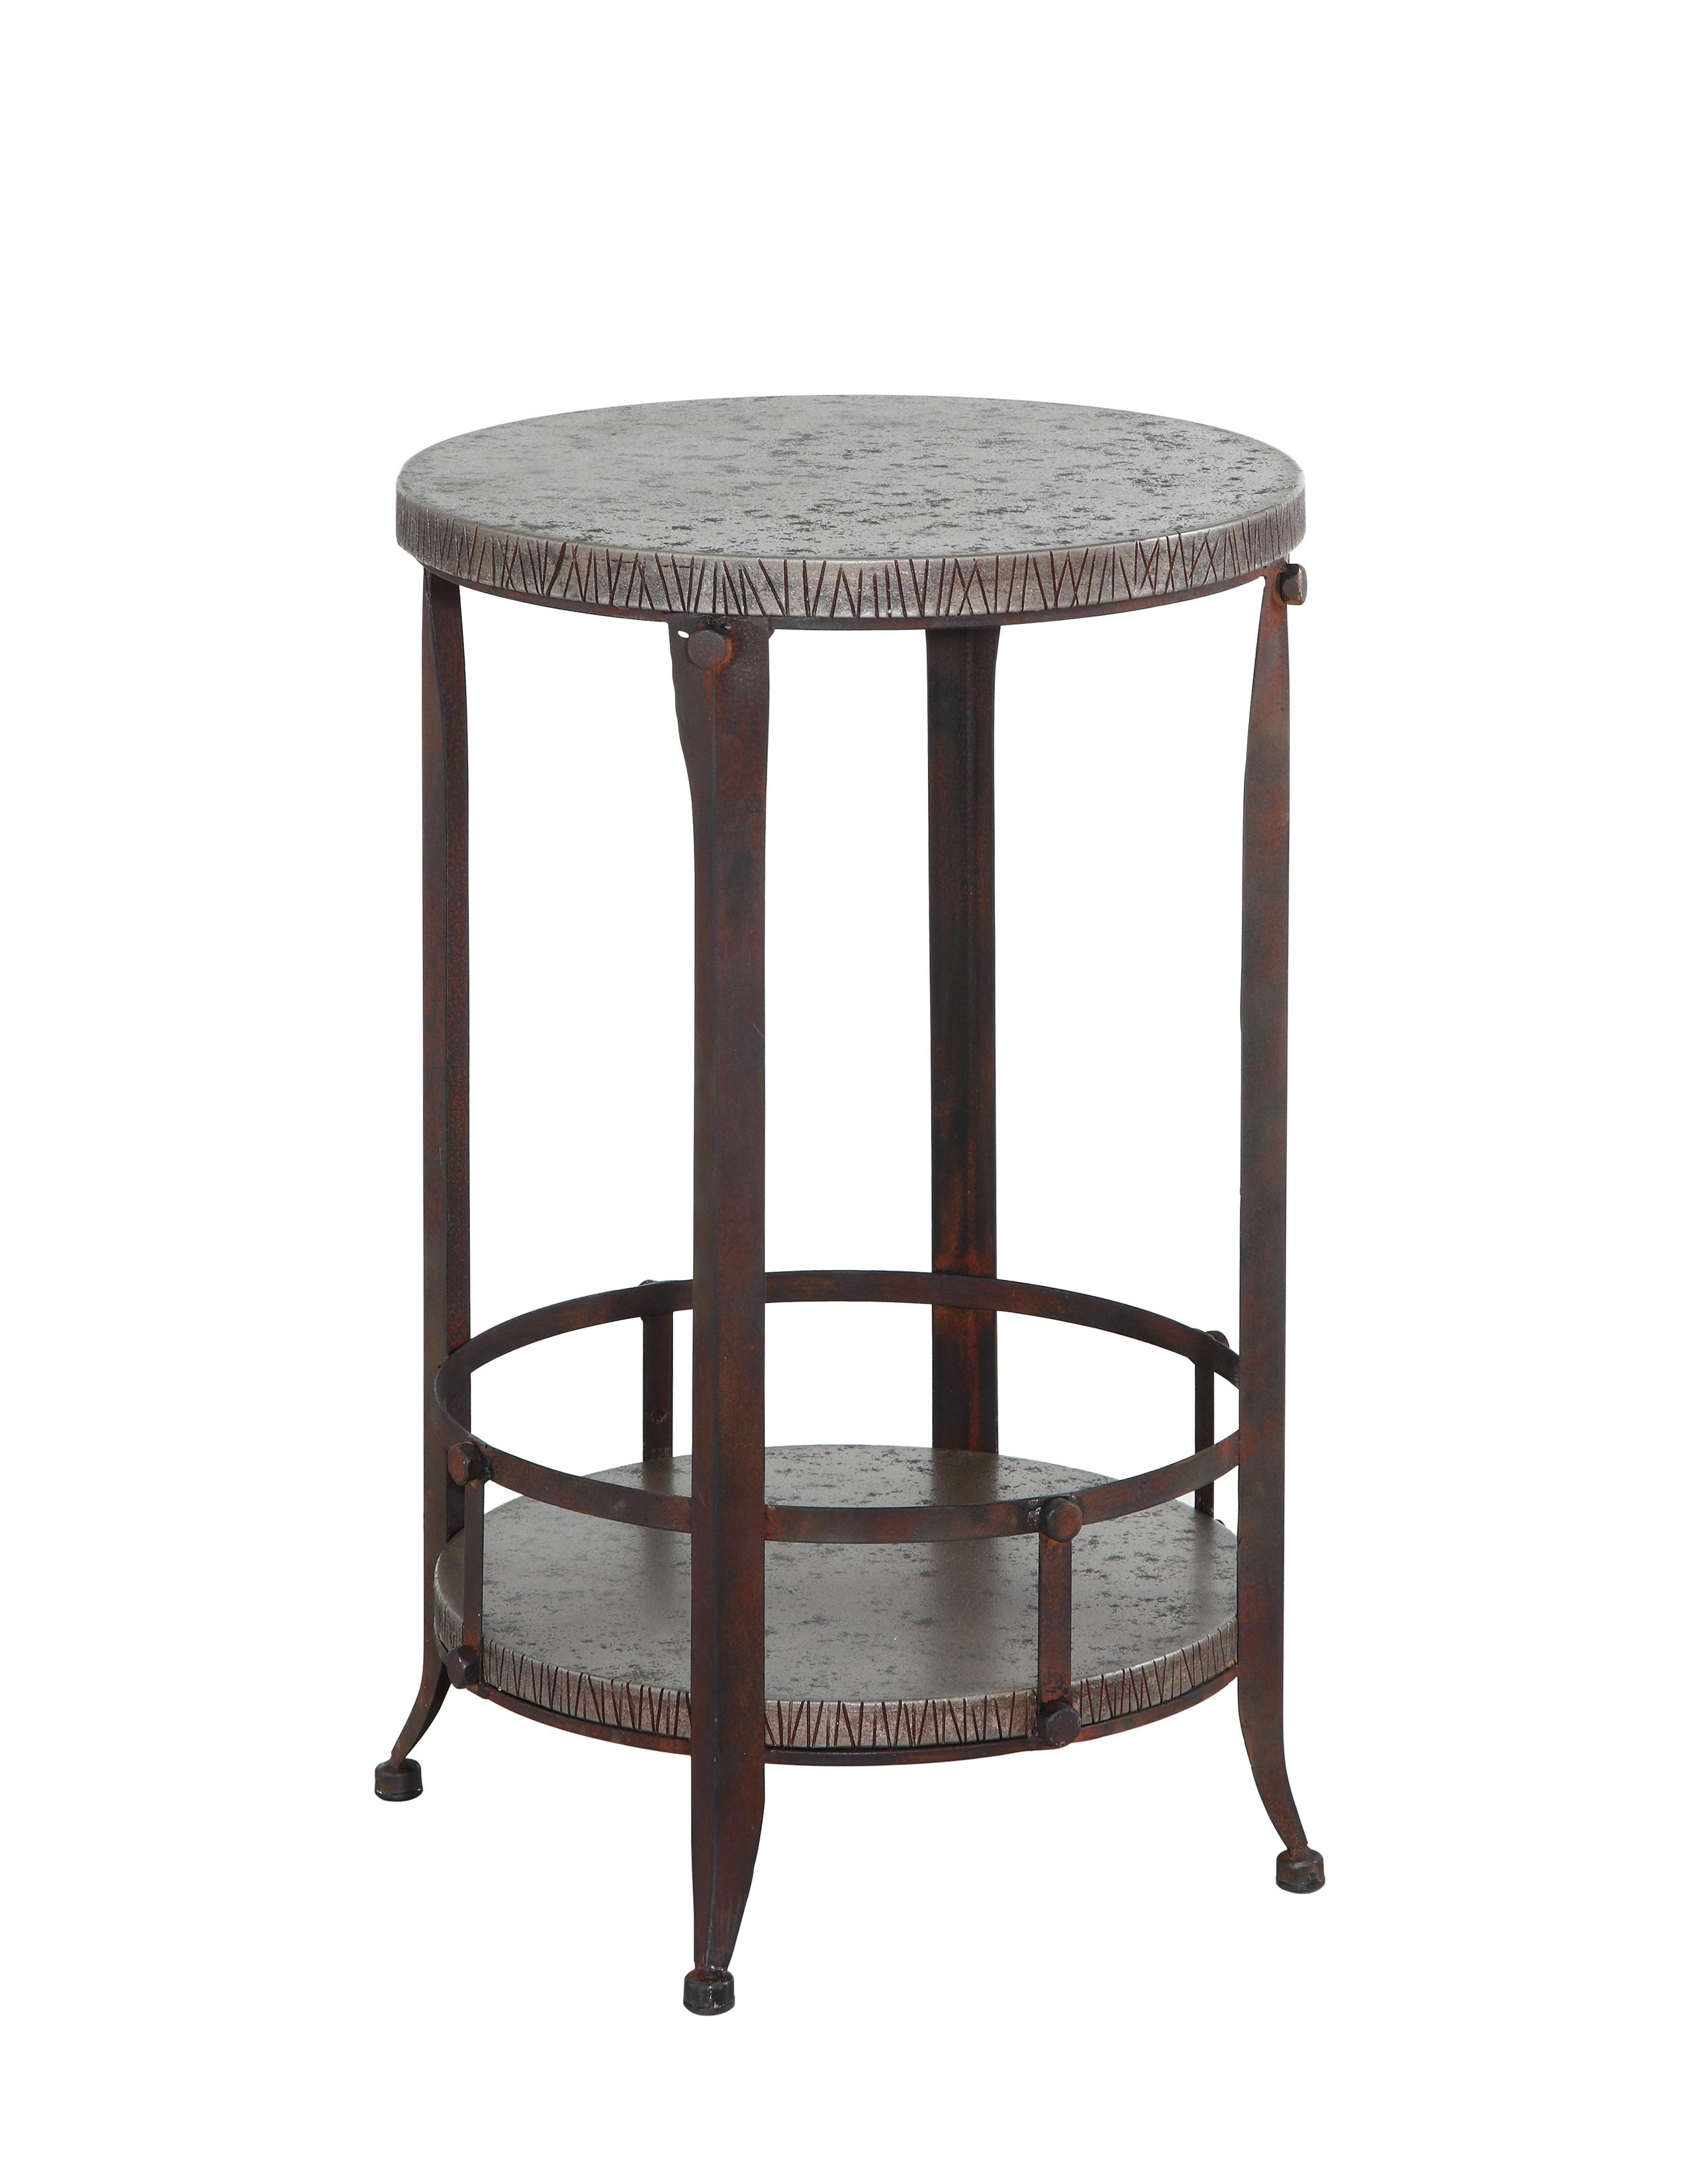 gray marble small round accent table using brown painted wrought focus for amazing iron tables the top reference metal kijiji dining entryway bench ikea rugs target front room